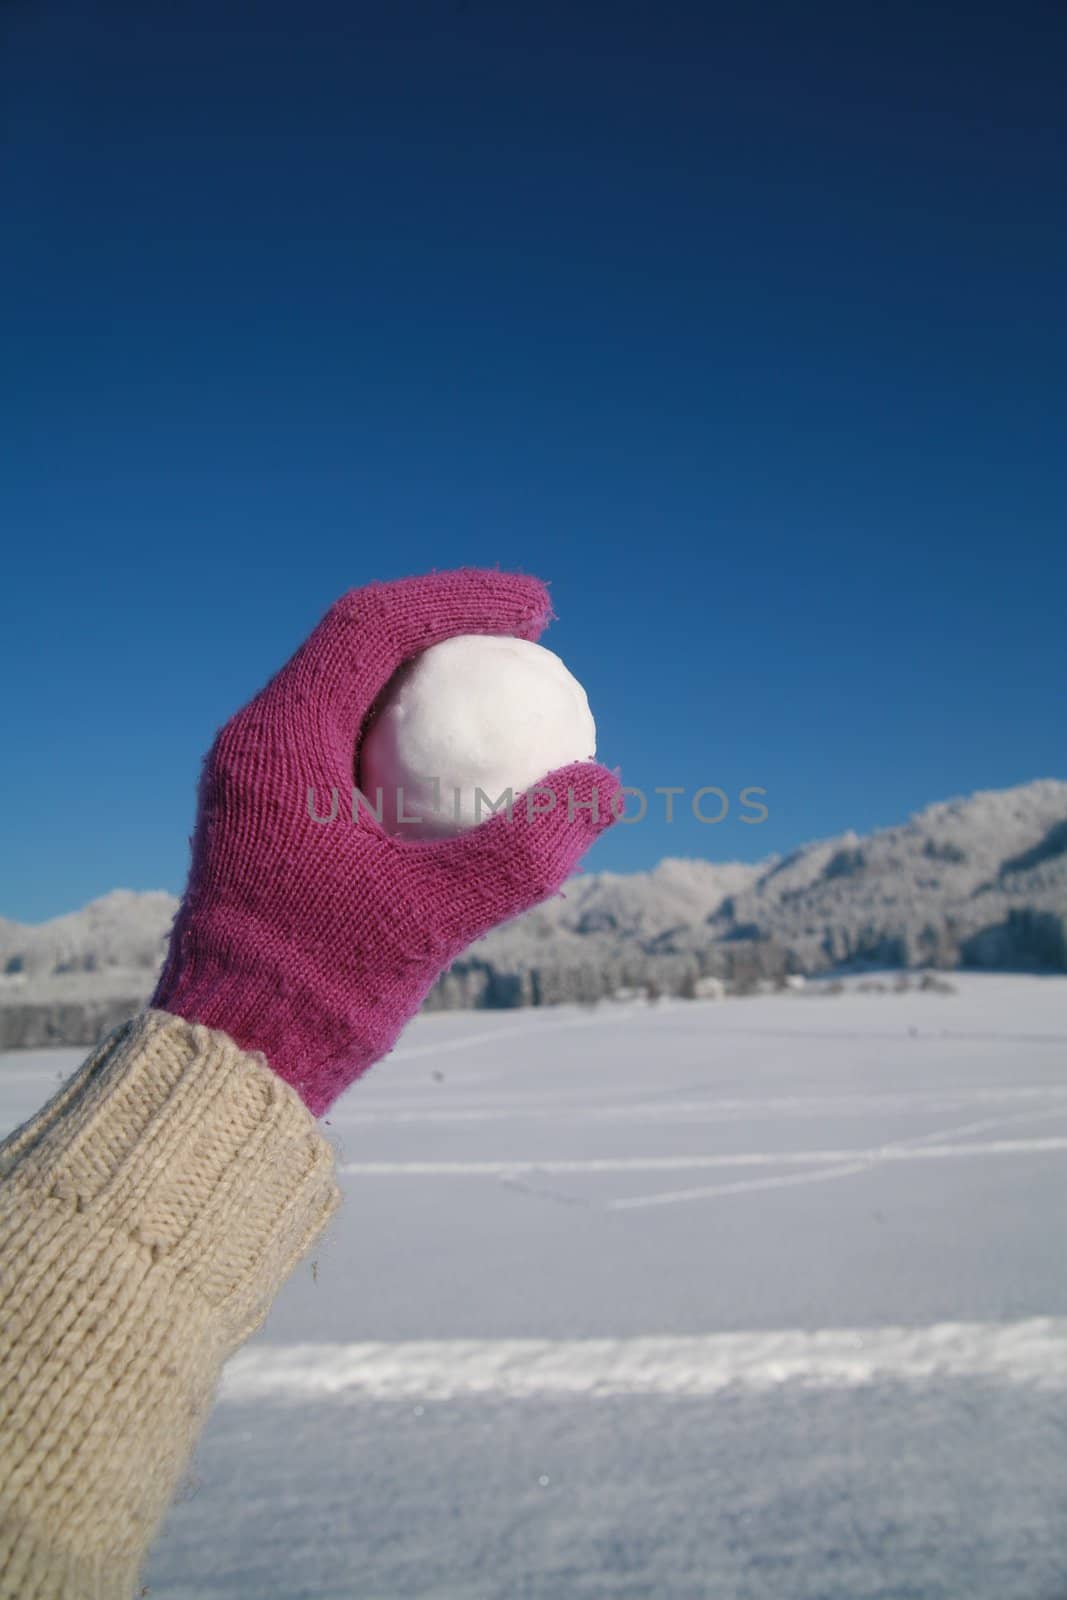 happy snow ball fight in winter time